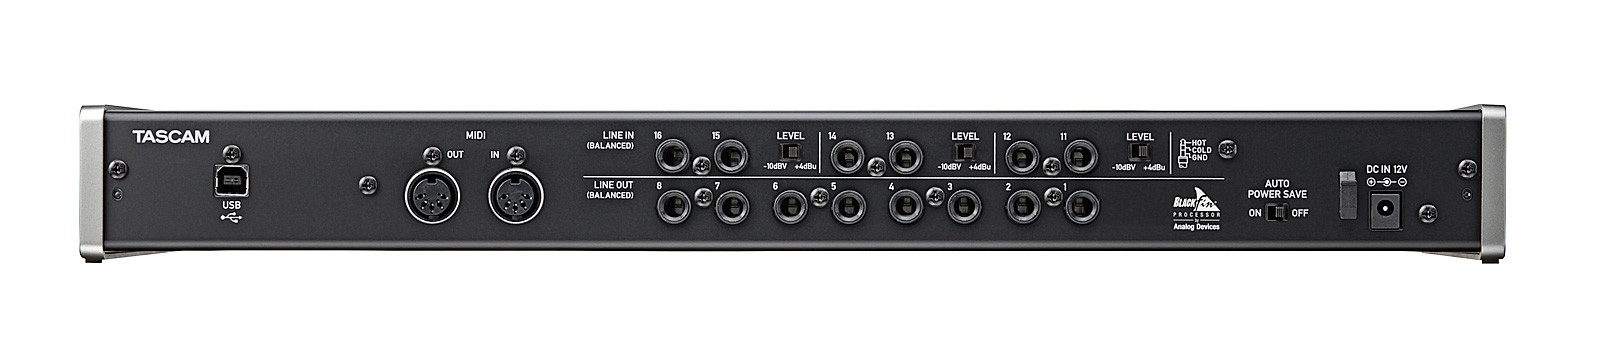 tascam us 16 by 80 windows 10 drivers